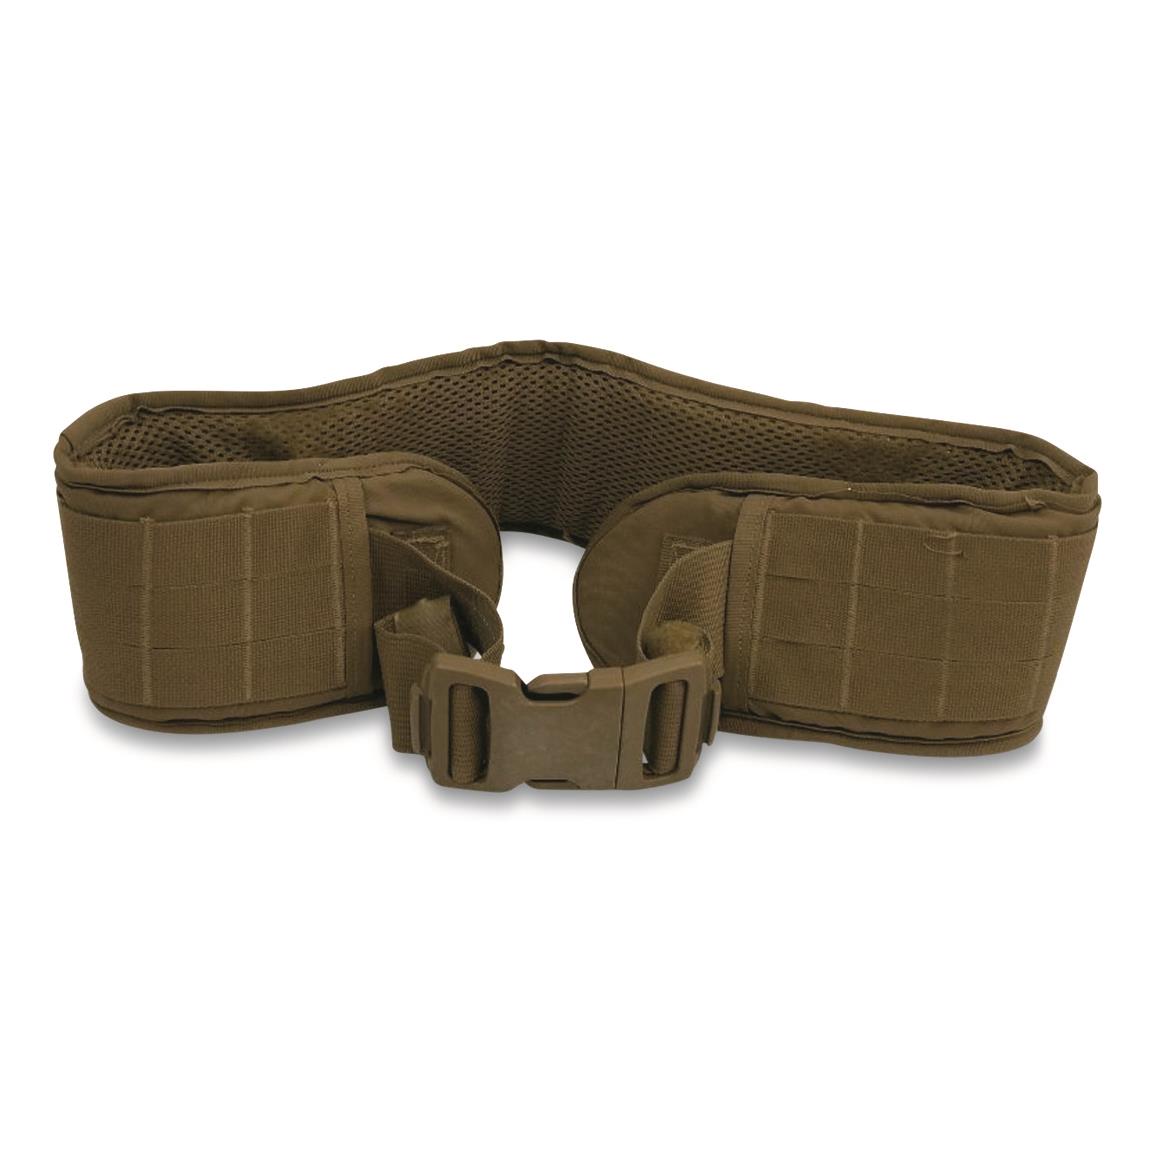 USMC Military Surplus FILBE Padded Tactical Sub Belt, Used, Coyote